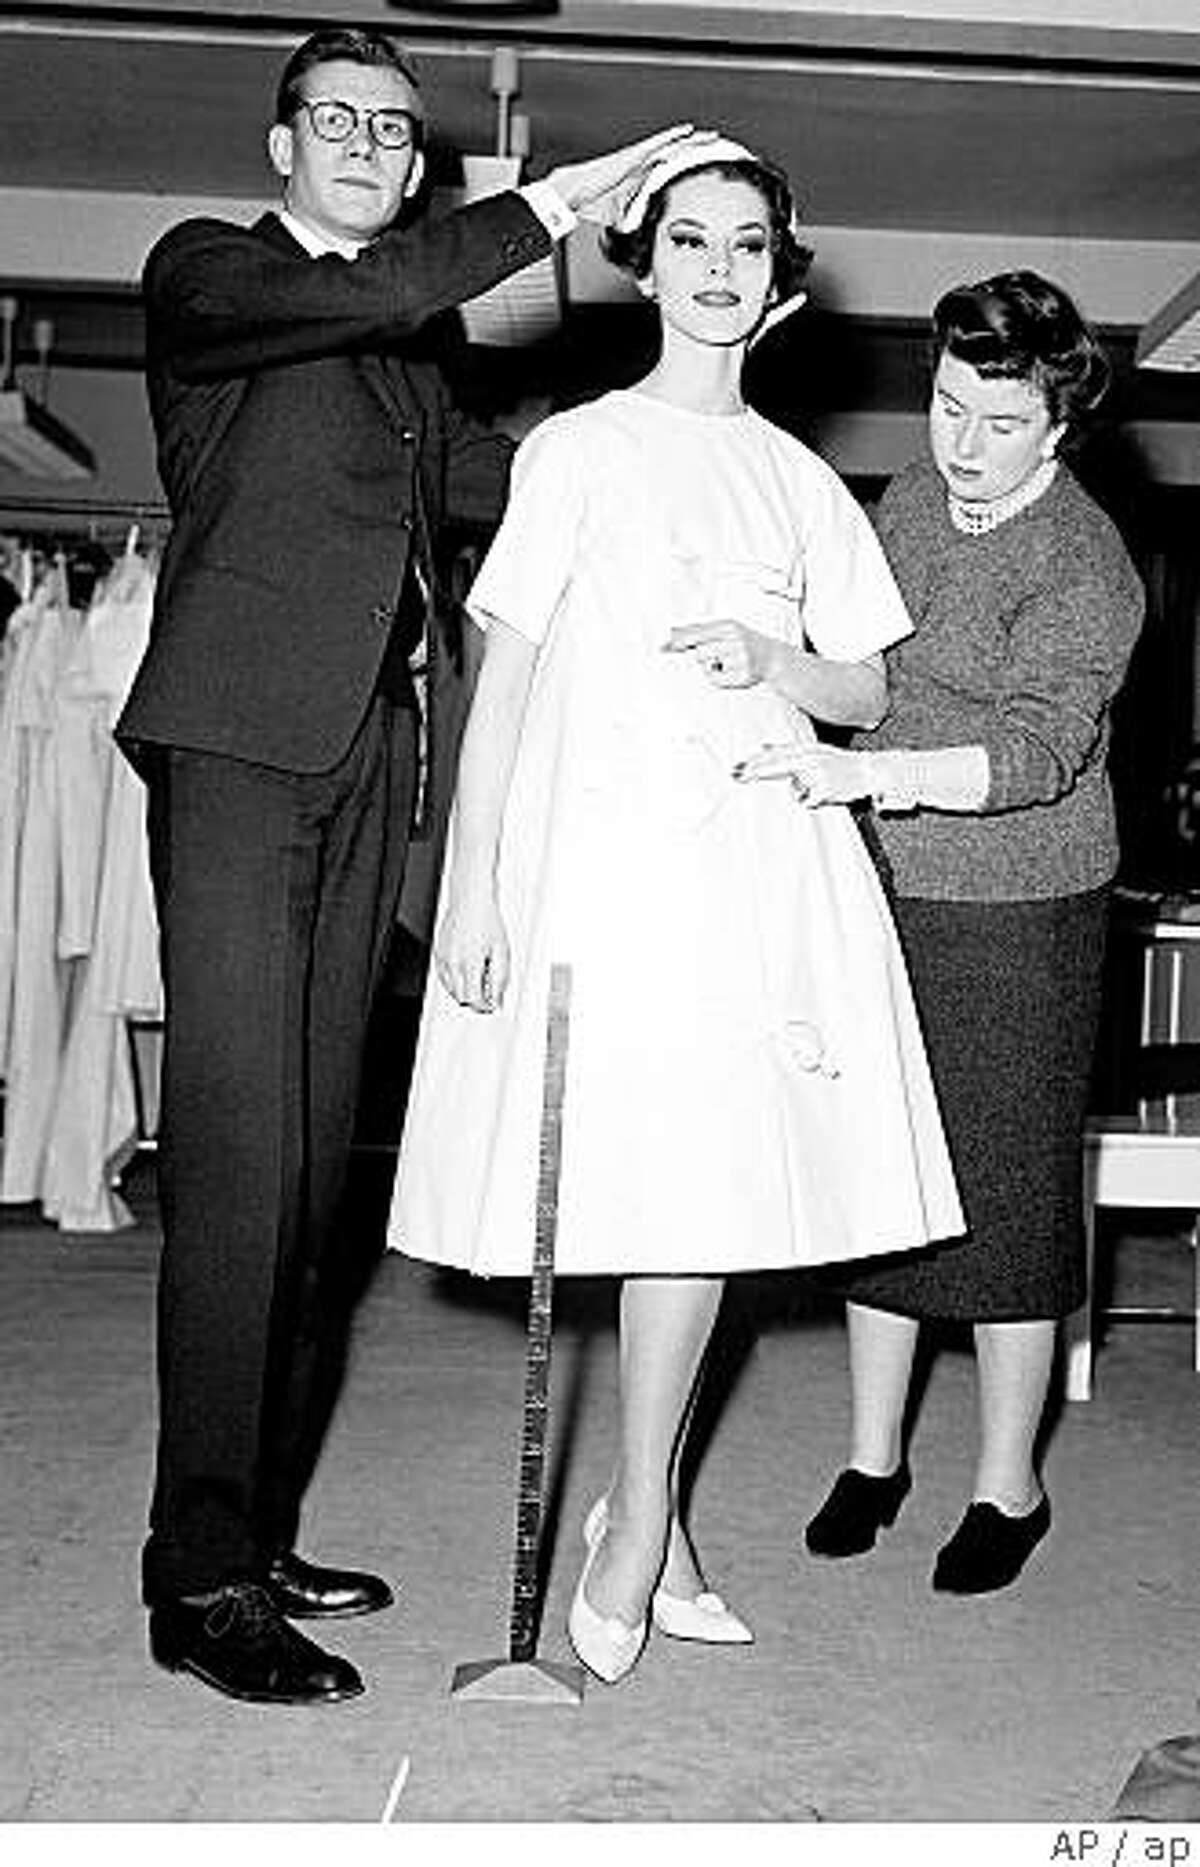 ** FILE ** In this March 14, 1958 file photo, working in front of a mirror, French fashion designer Yves Saint Laurent tries a hat on model Svetlana in his workshop in Paris, France. He is working on his Dior New York collection with the help of his assistant Marguerite Carre. The dress with narrow shoulders and wide, swinging skirt is designed in the trapeze line, which Saint Laurent introduced in his first solo collection in February. Yves Saint Laurent, who reworked the rules of fashion by putting women into elegant pantsuits that came to define how modern women dressed, died Sunday evening June 1, 2008. He was 71. (AP Photo/File)